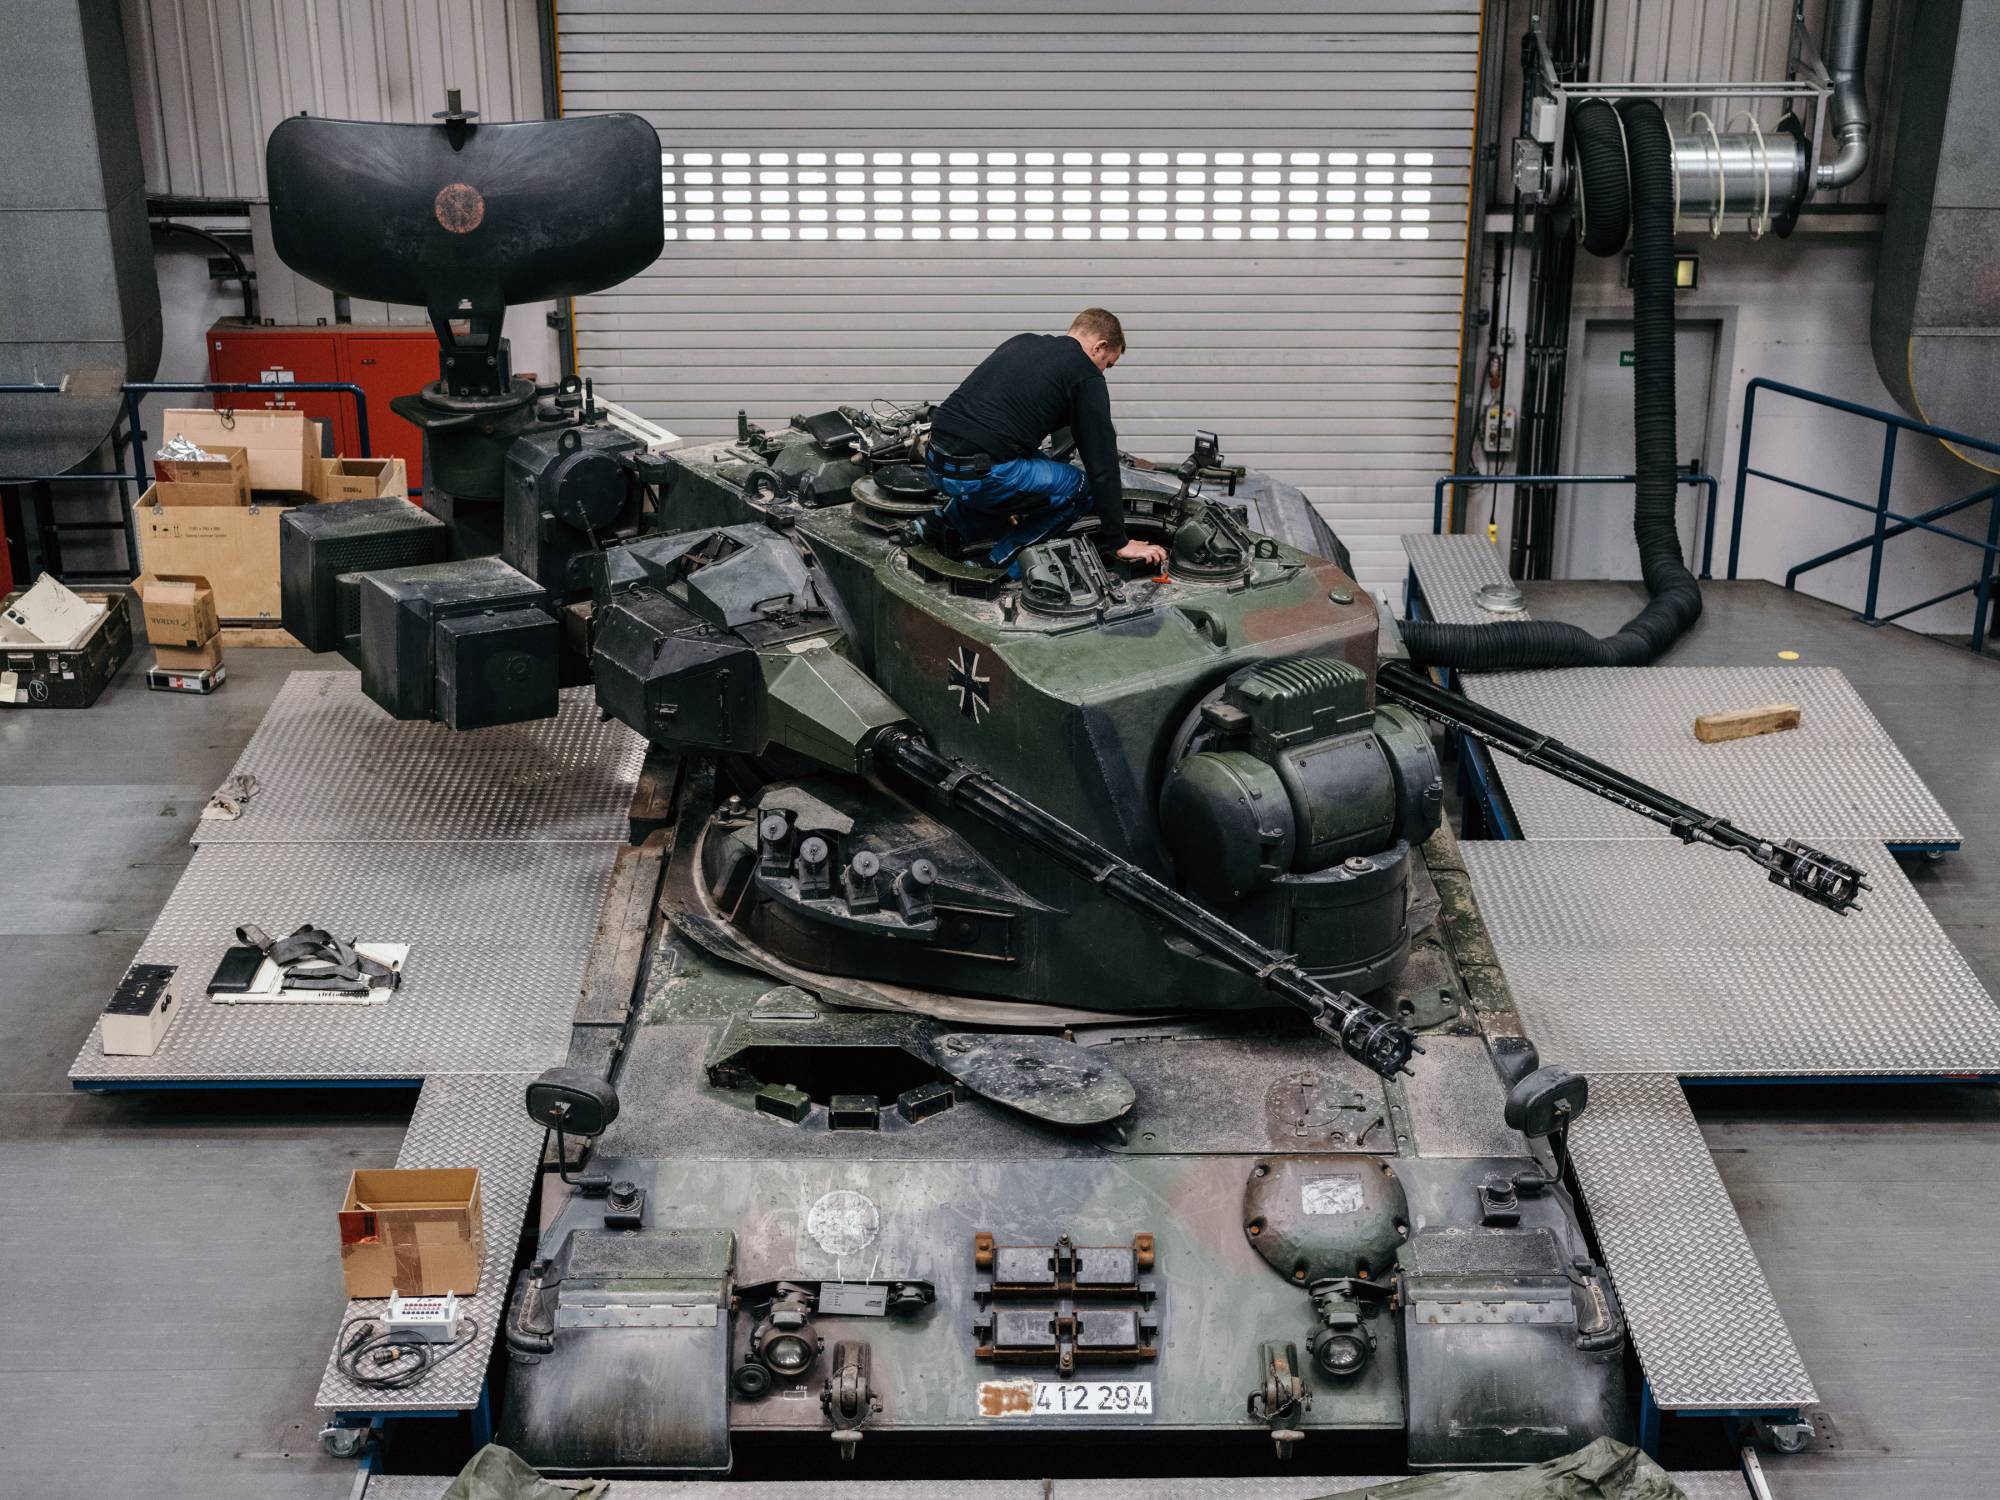 A mechanic works on a Gepard mobile antiaircraft system at the Krauss-Maffei Wegmann factory in Munich in April 2022. In Ukraine, the kind of European war thought inconceivable — heavy use of artillery and tanks — is chewing up modest stockpiles of artillery, ammunition and air defenses. | FELIX SCHMITT / THE NEW YORK TIMES